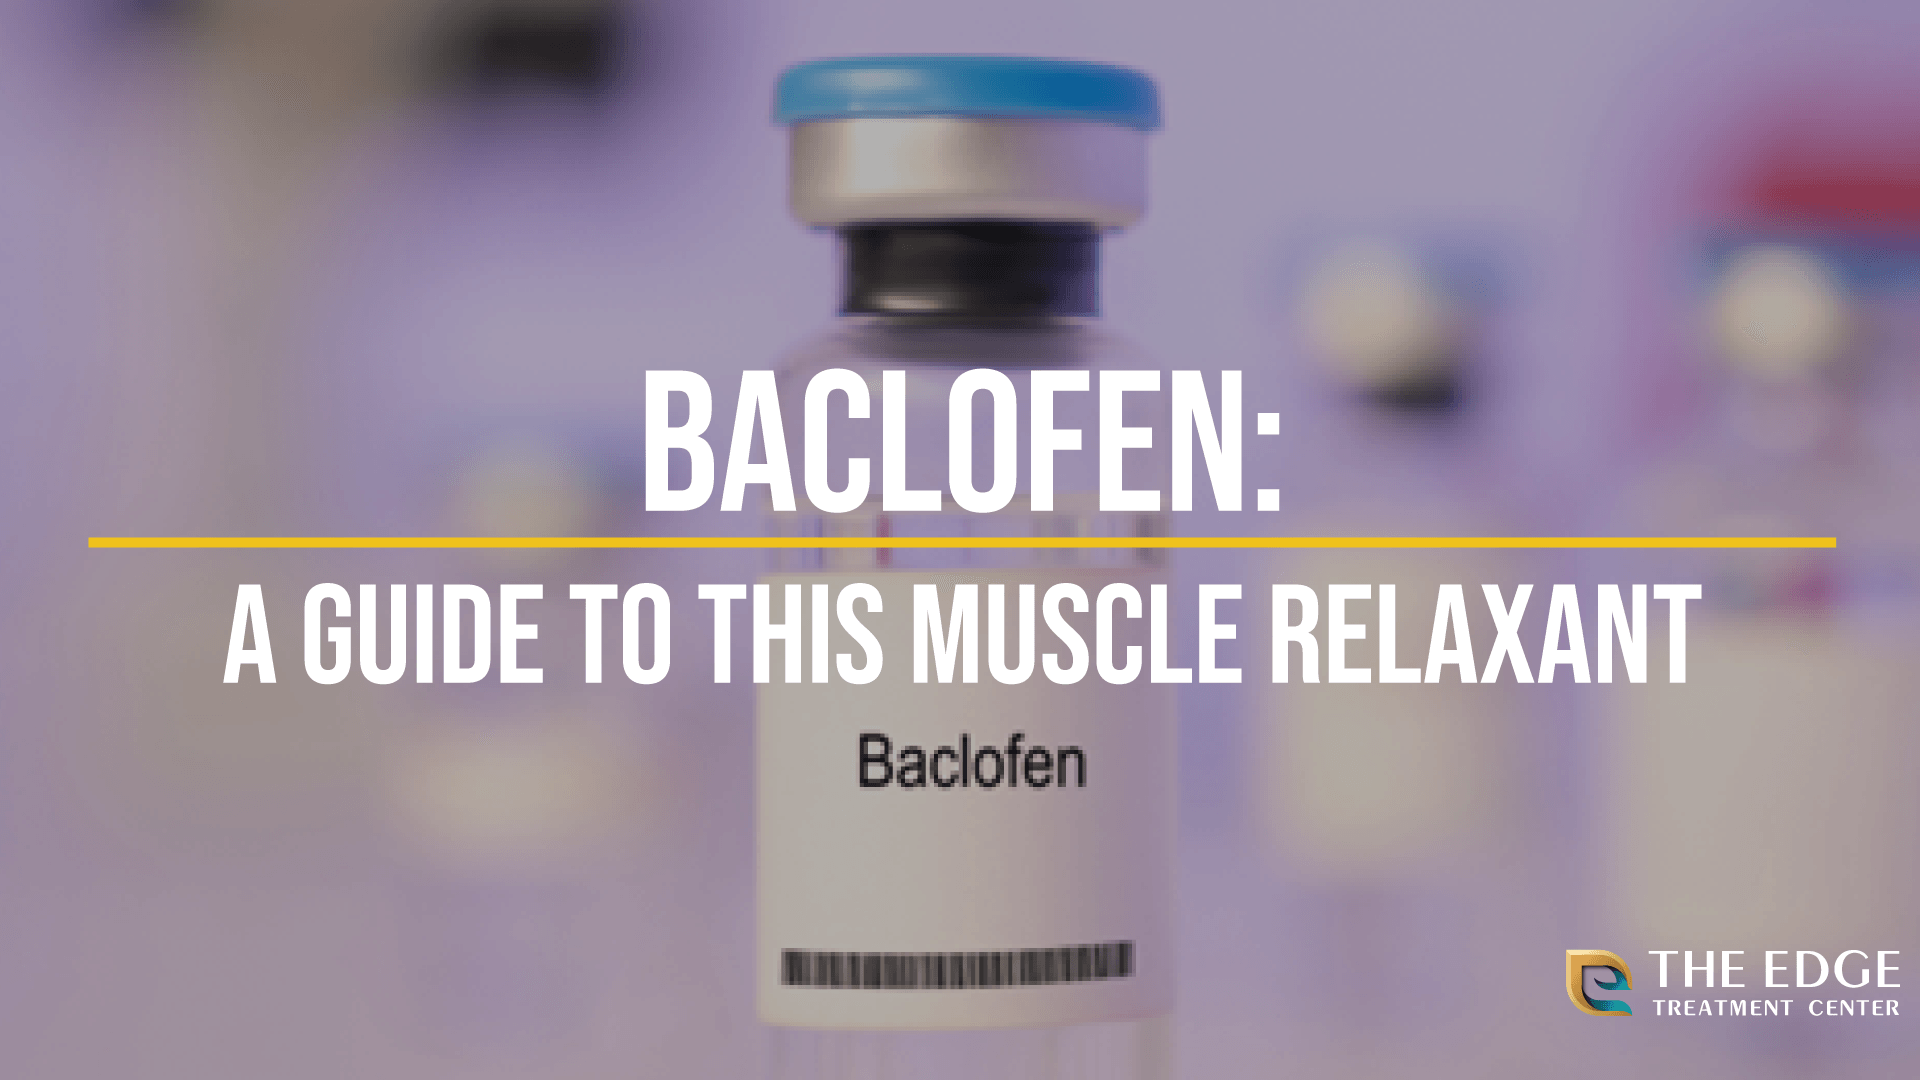 What is Baclofen?